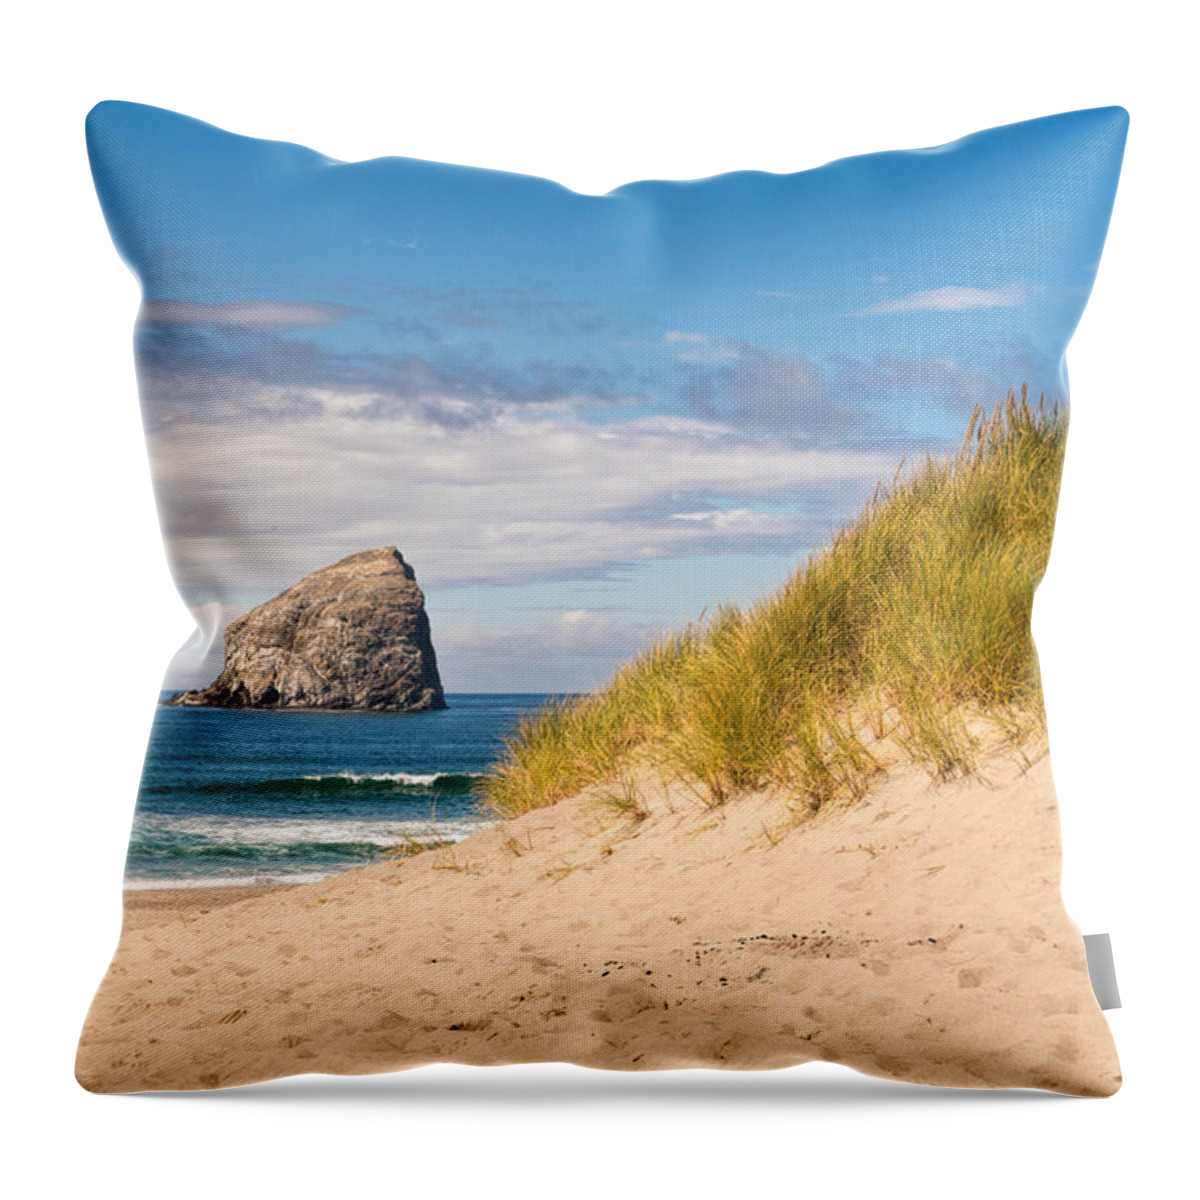 Sky Throw Pillow featuring the photograph Pacific Beach Haystack by Michael Hope